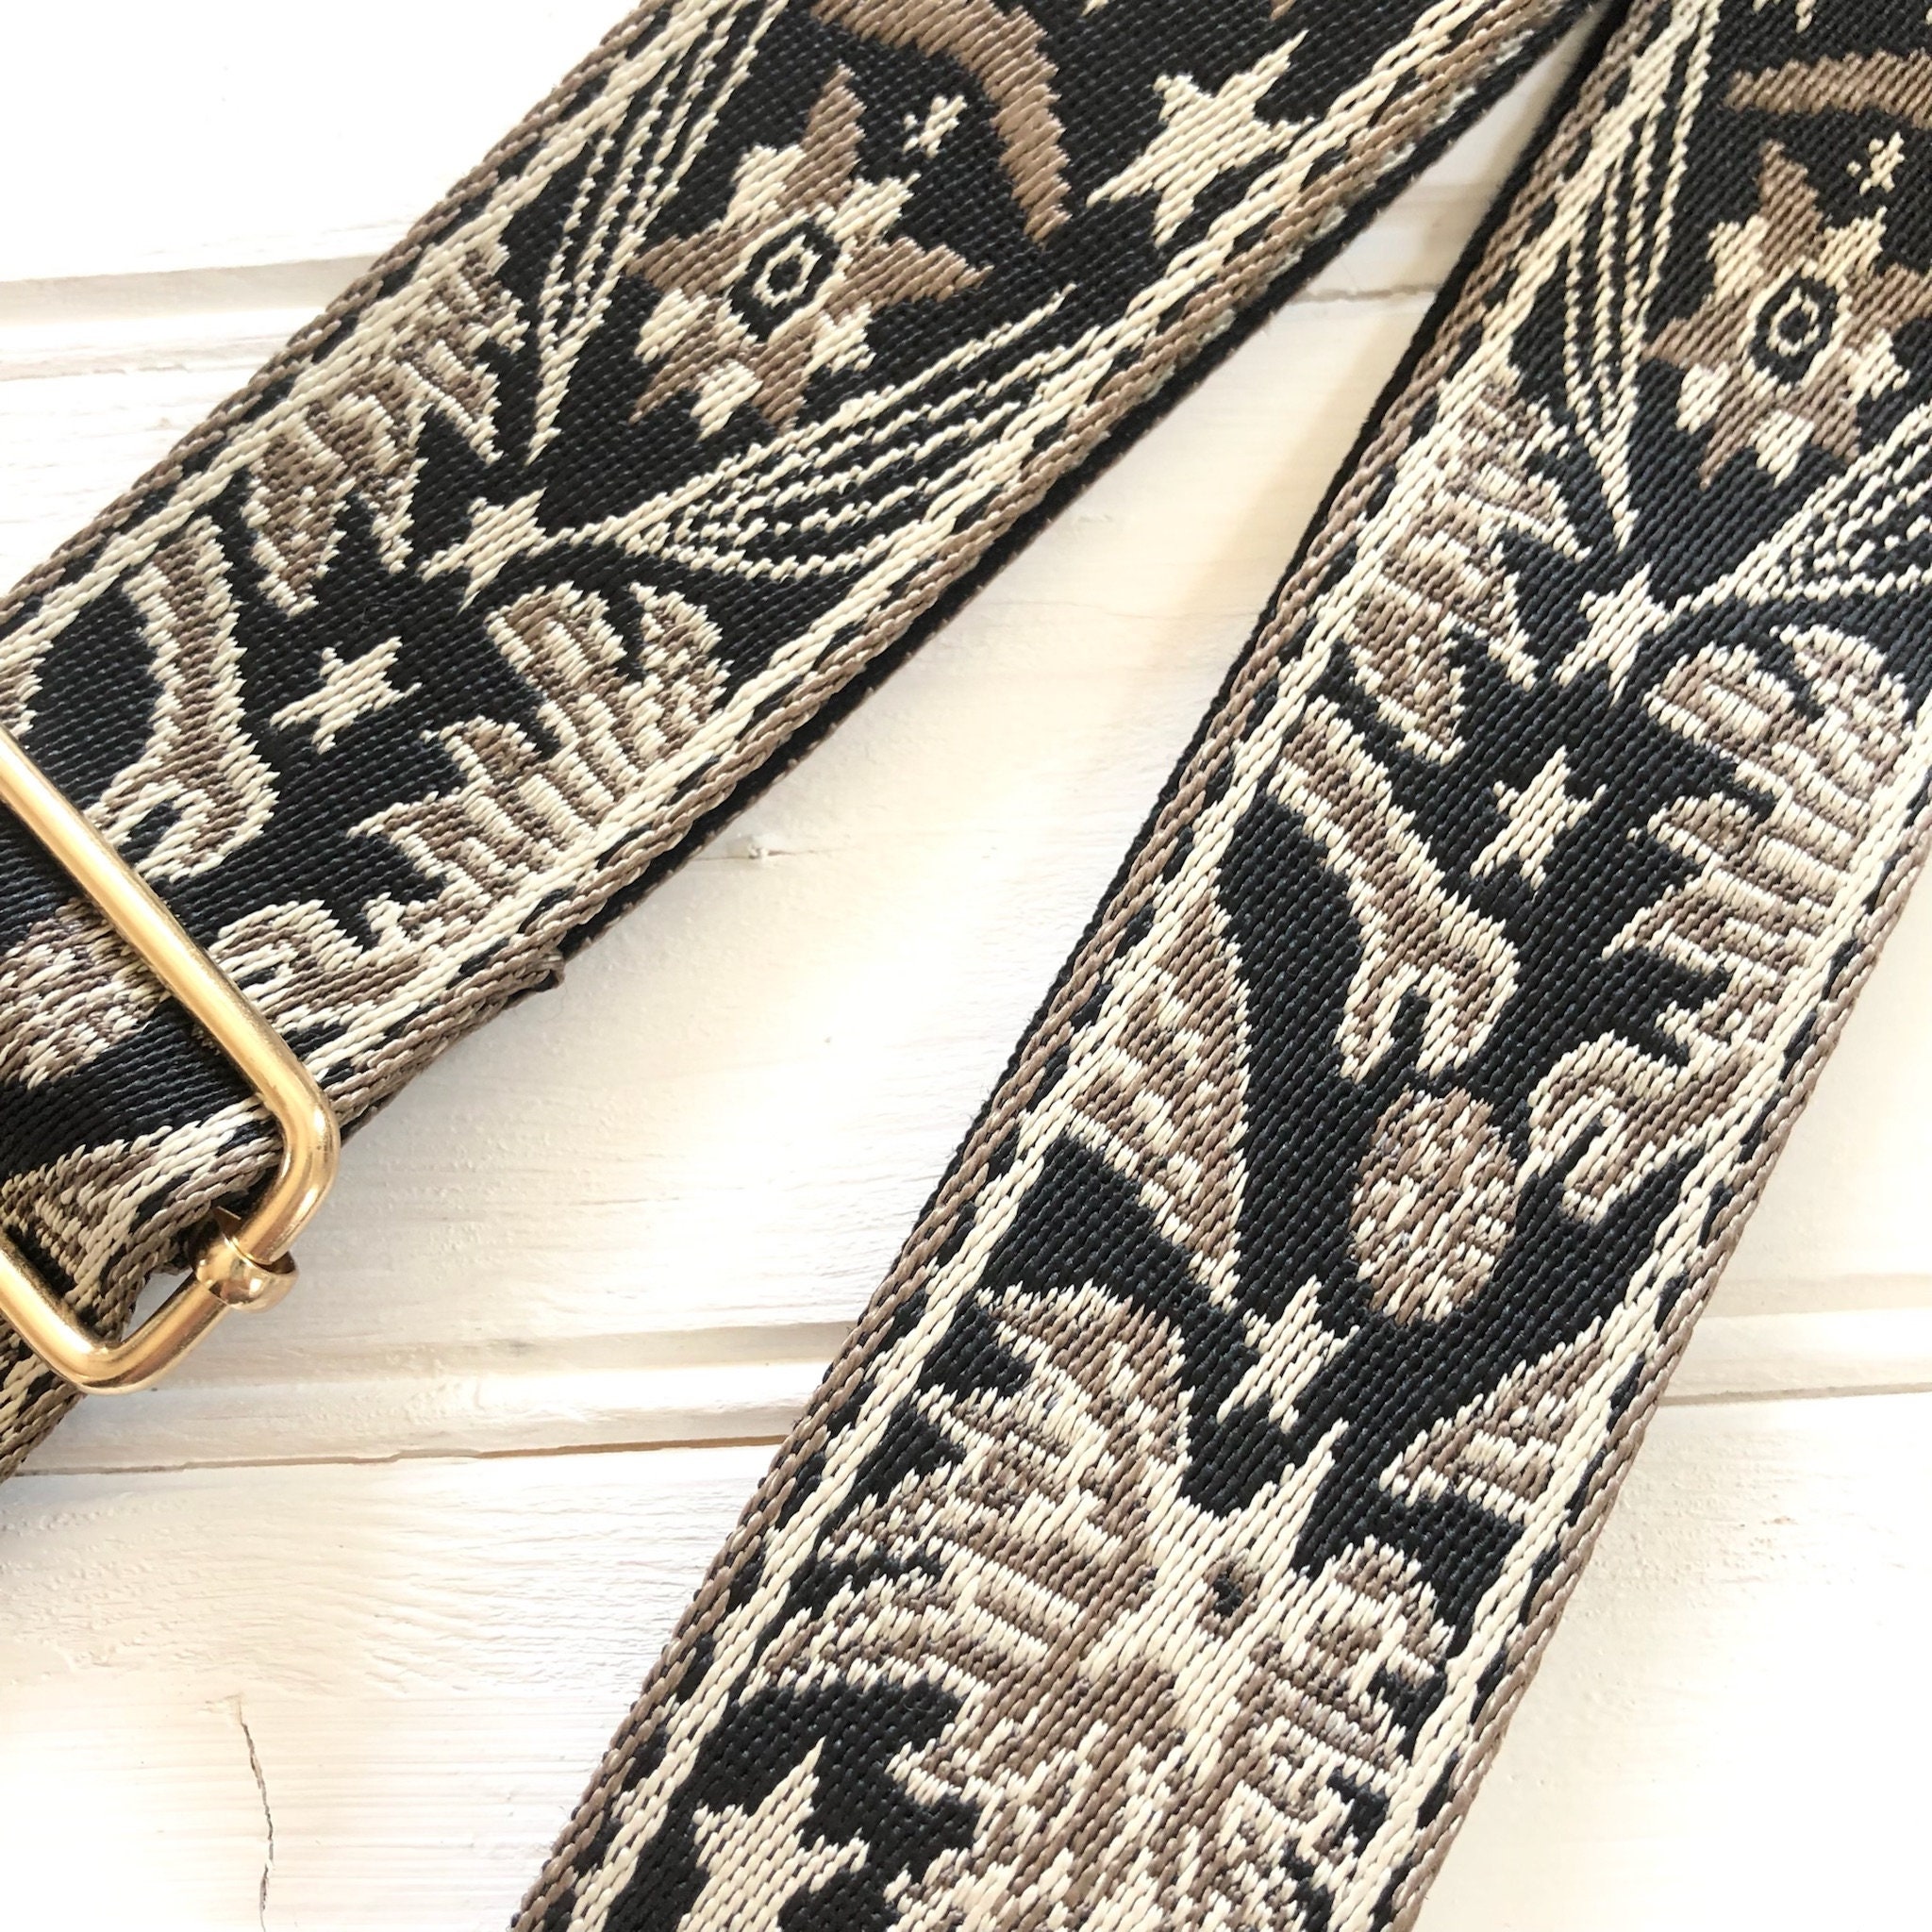 Black Embroidery Bag Strap, Black and Red Crossbody Bag Strap, Black boho  bag Strap, Black Patterned Bag Strap, Red, White Embroidered Strap